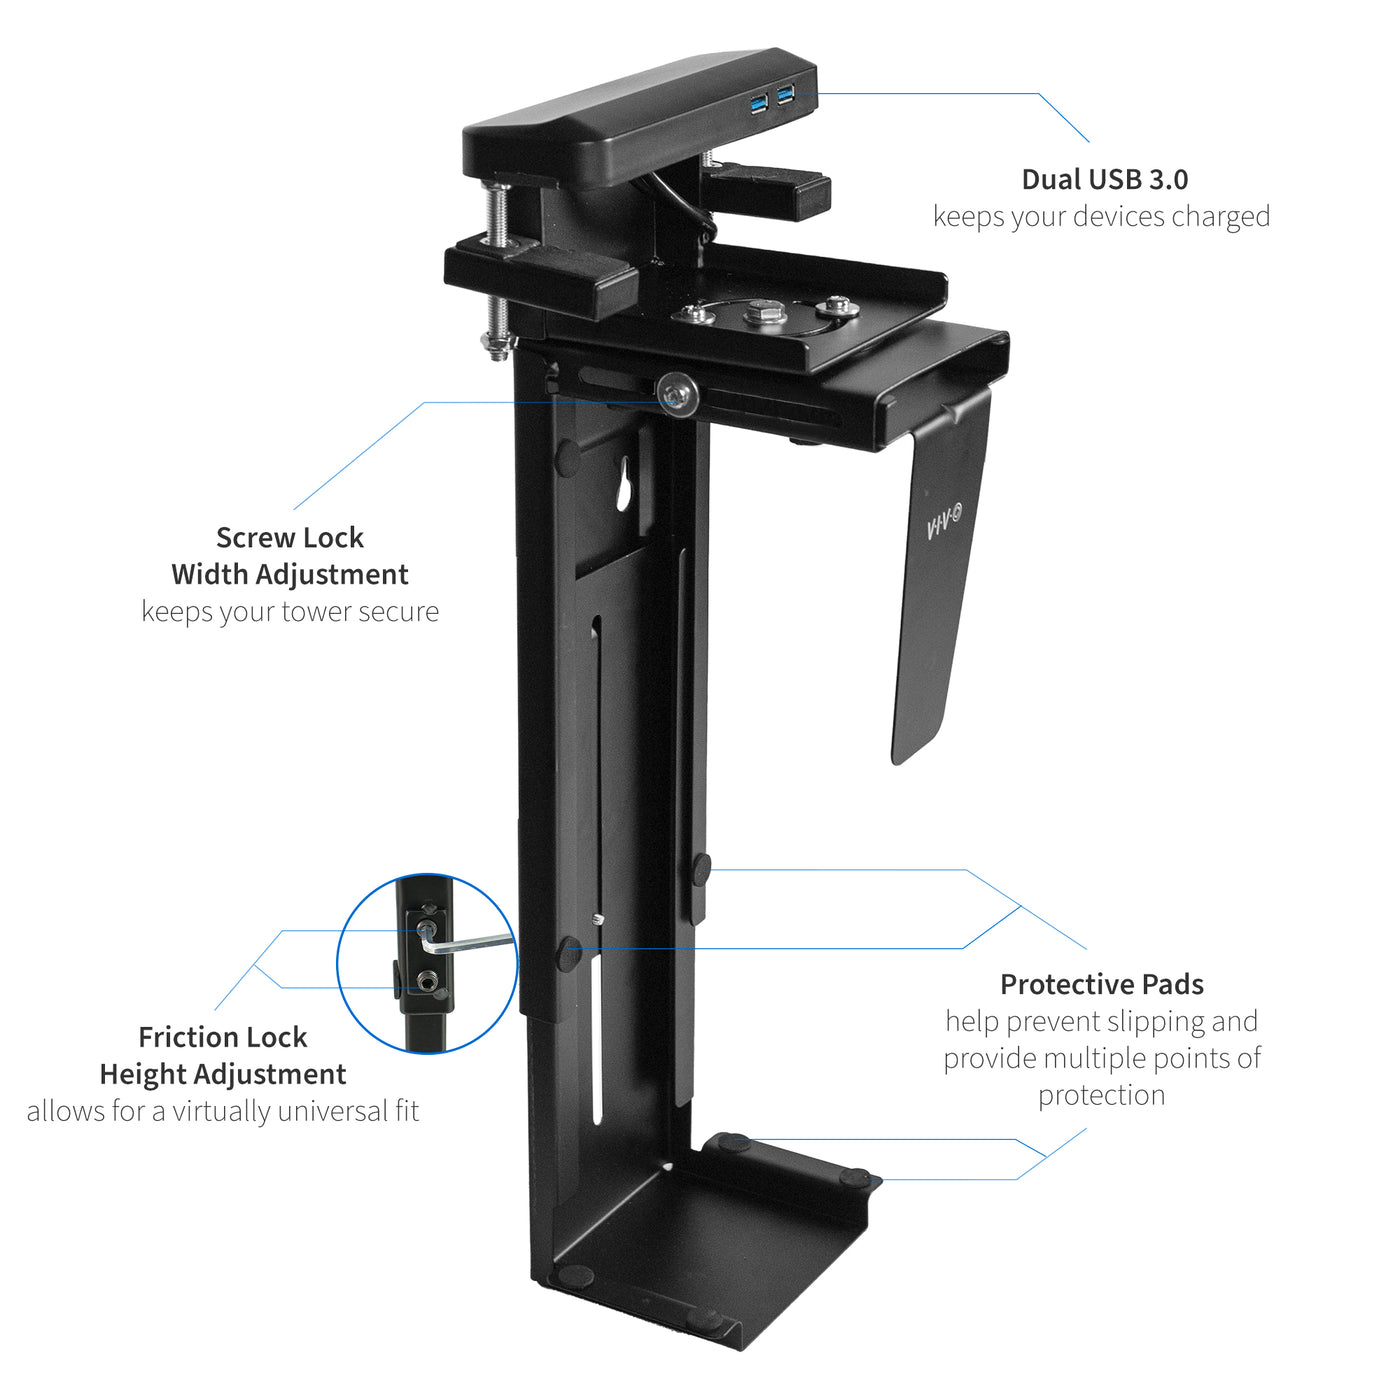 Sturdy clamp-on mount computer holder with friction lock height adjustment.